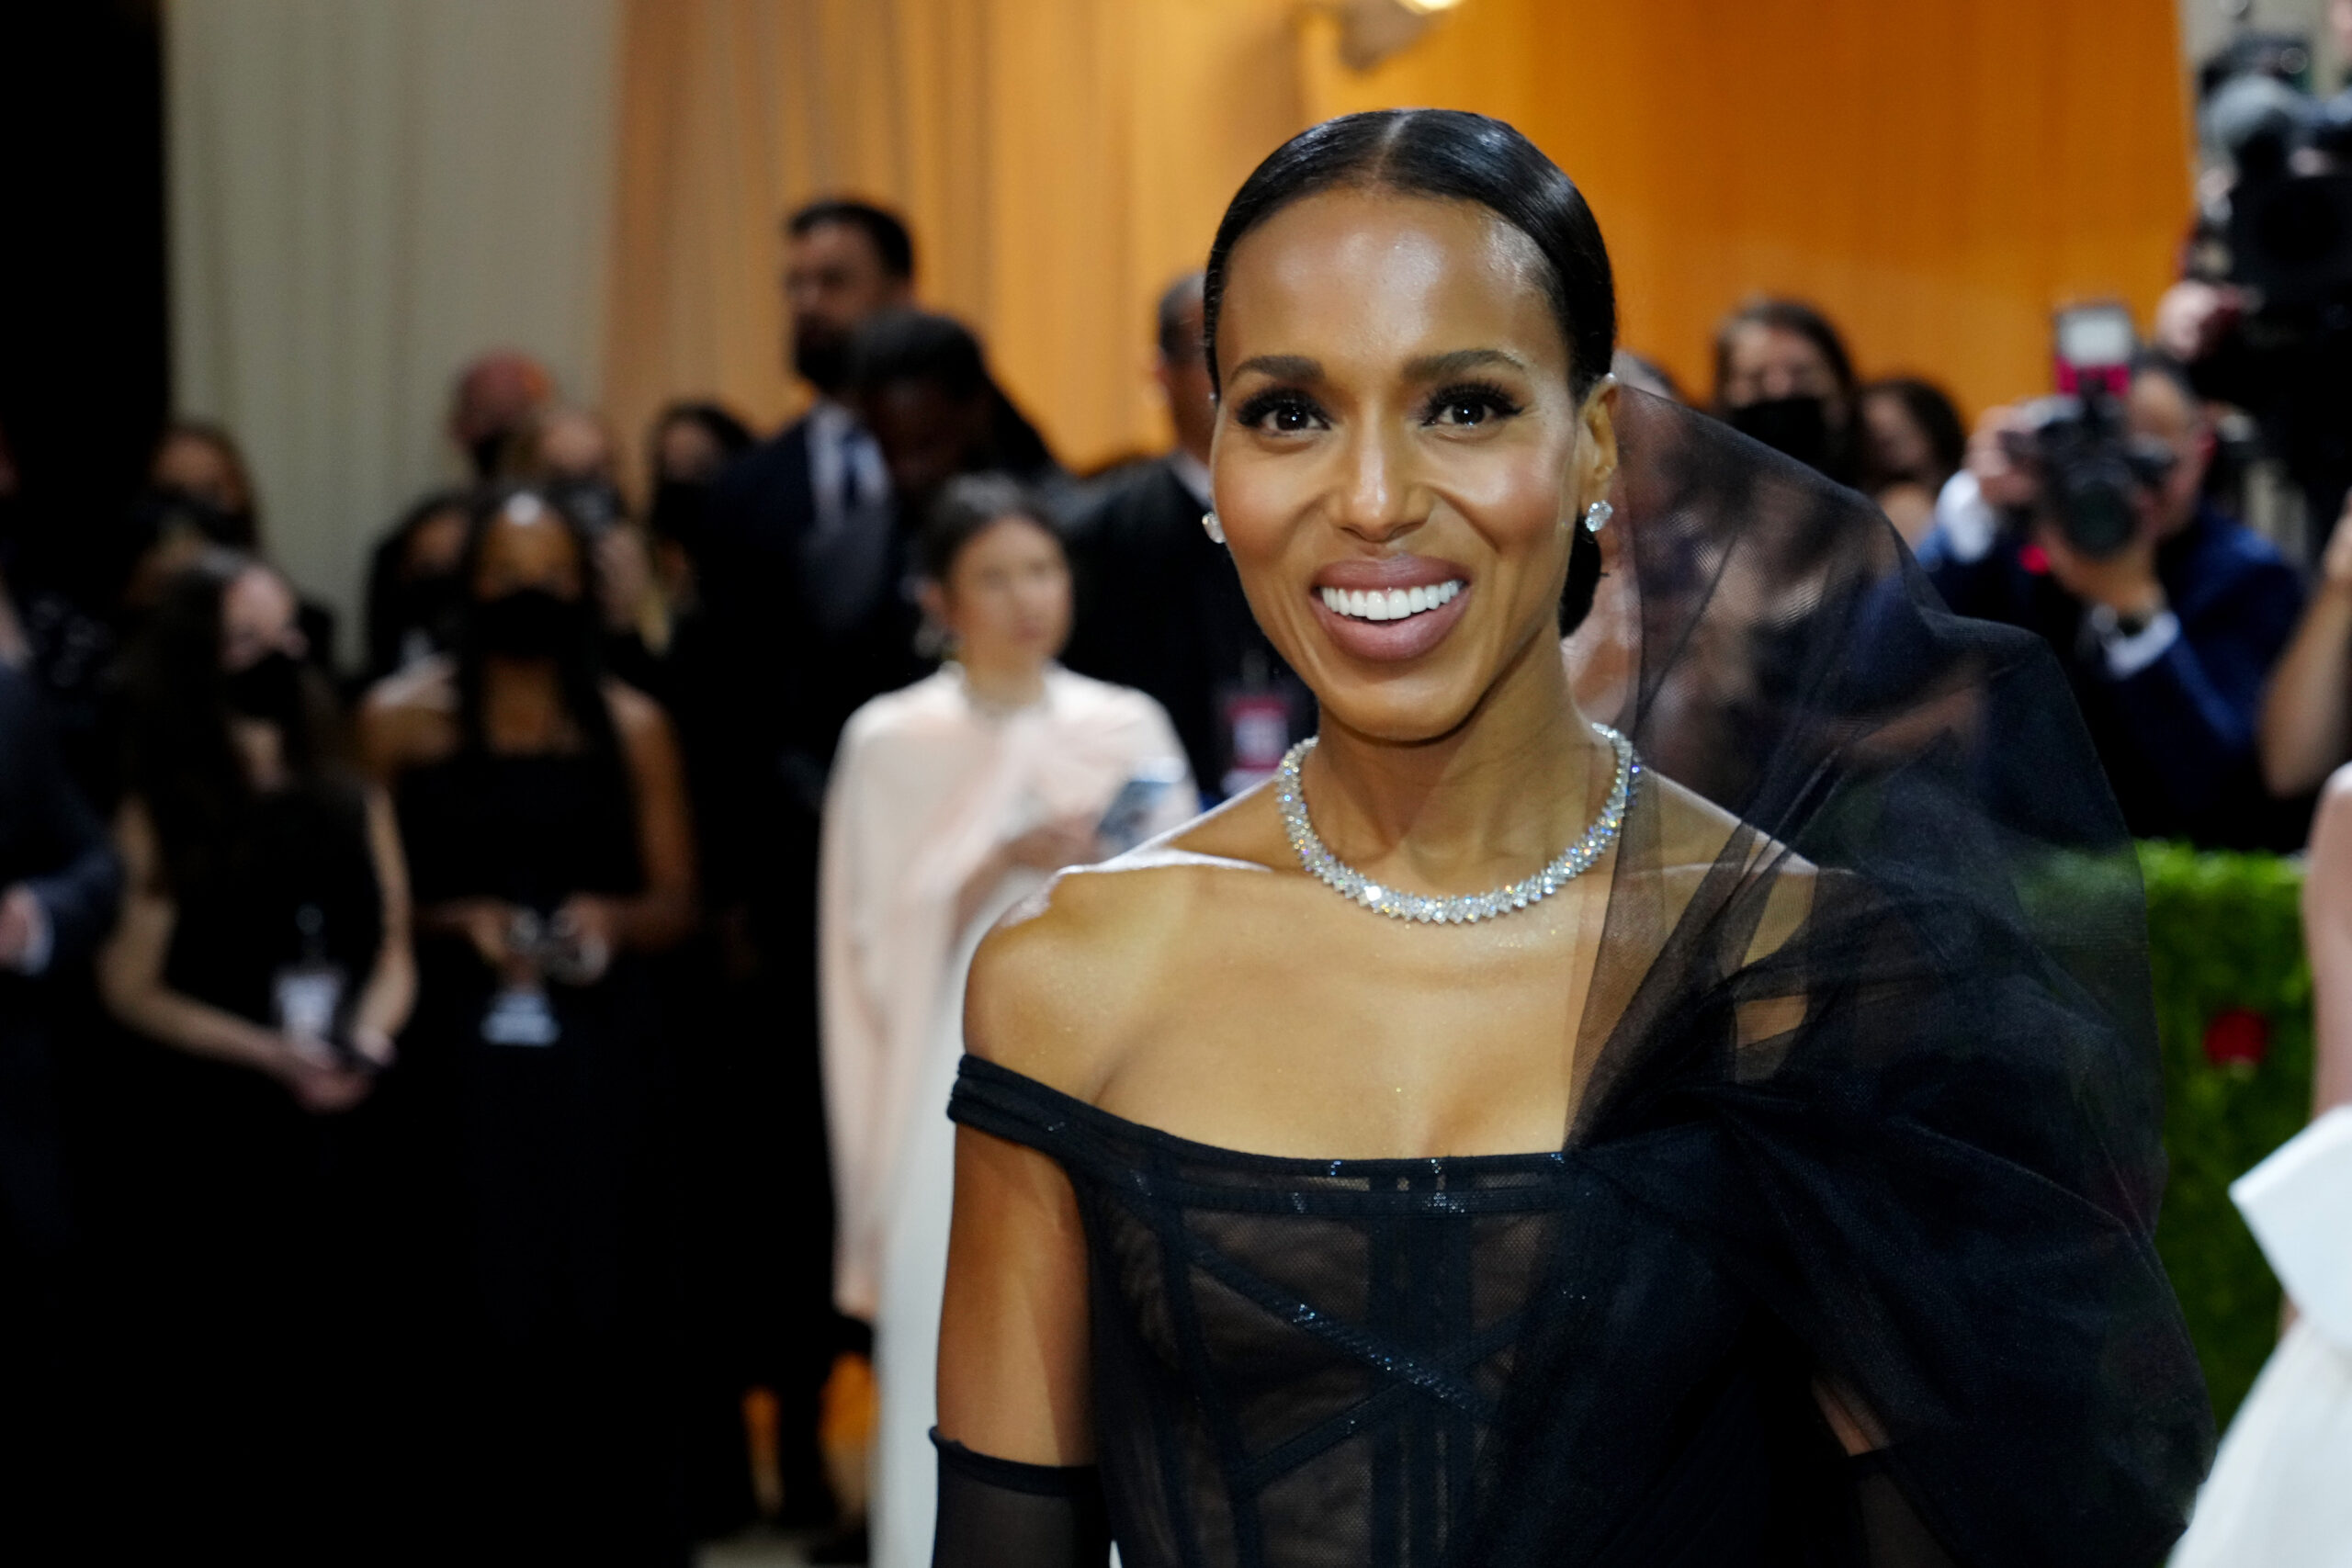 Kerry Washington Shares New TV Dad for Upcoming Project, and Fans Bring Up ‘Scandal’